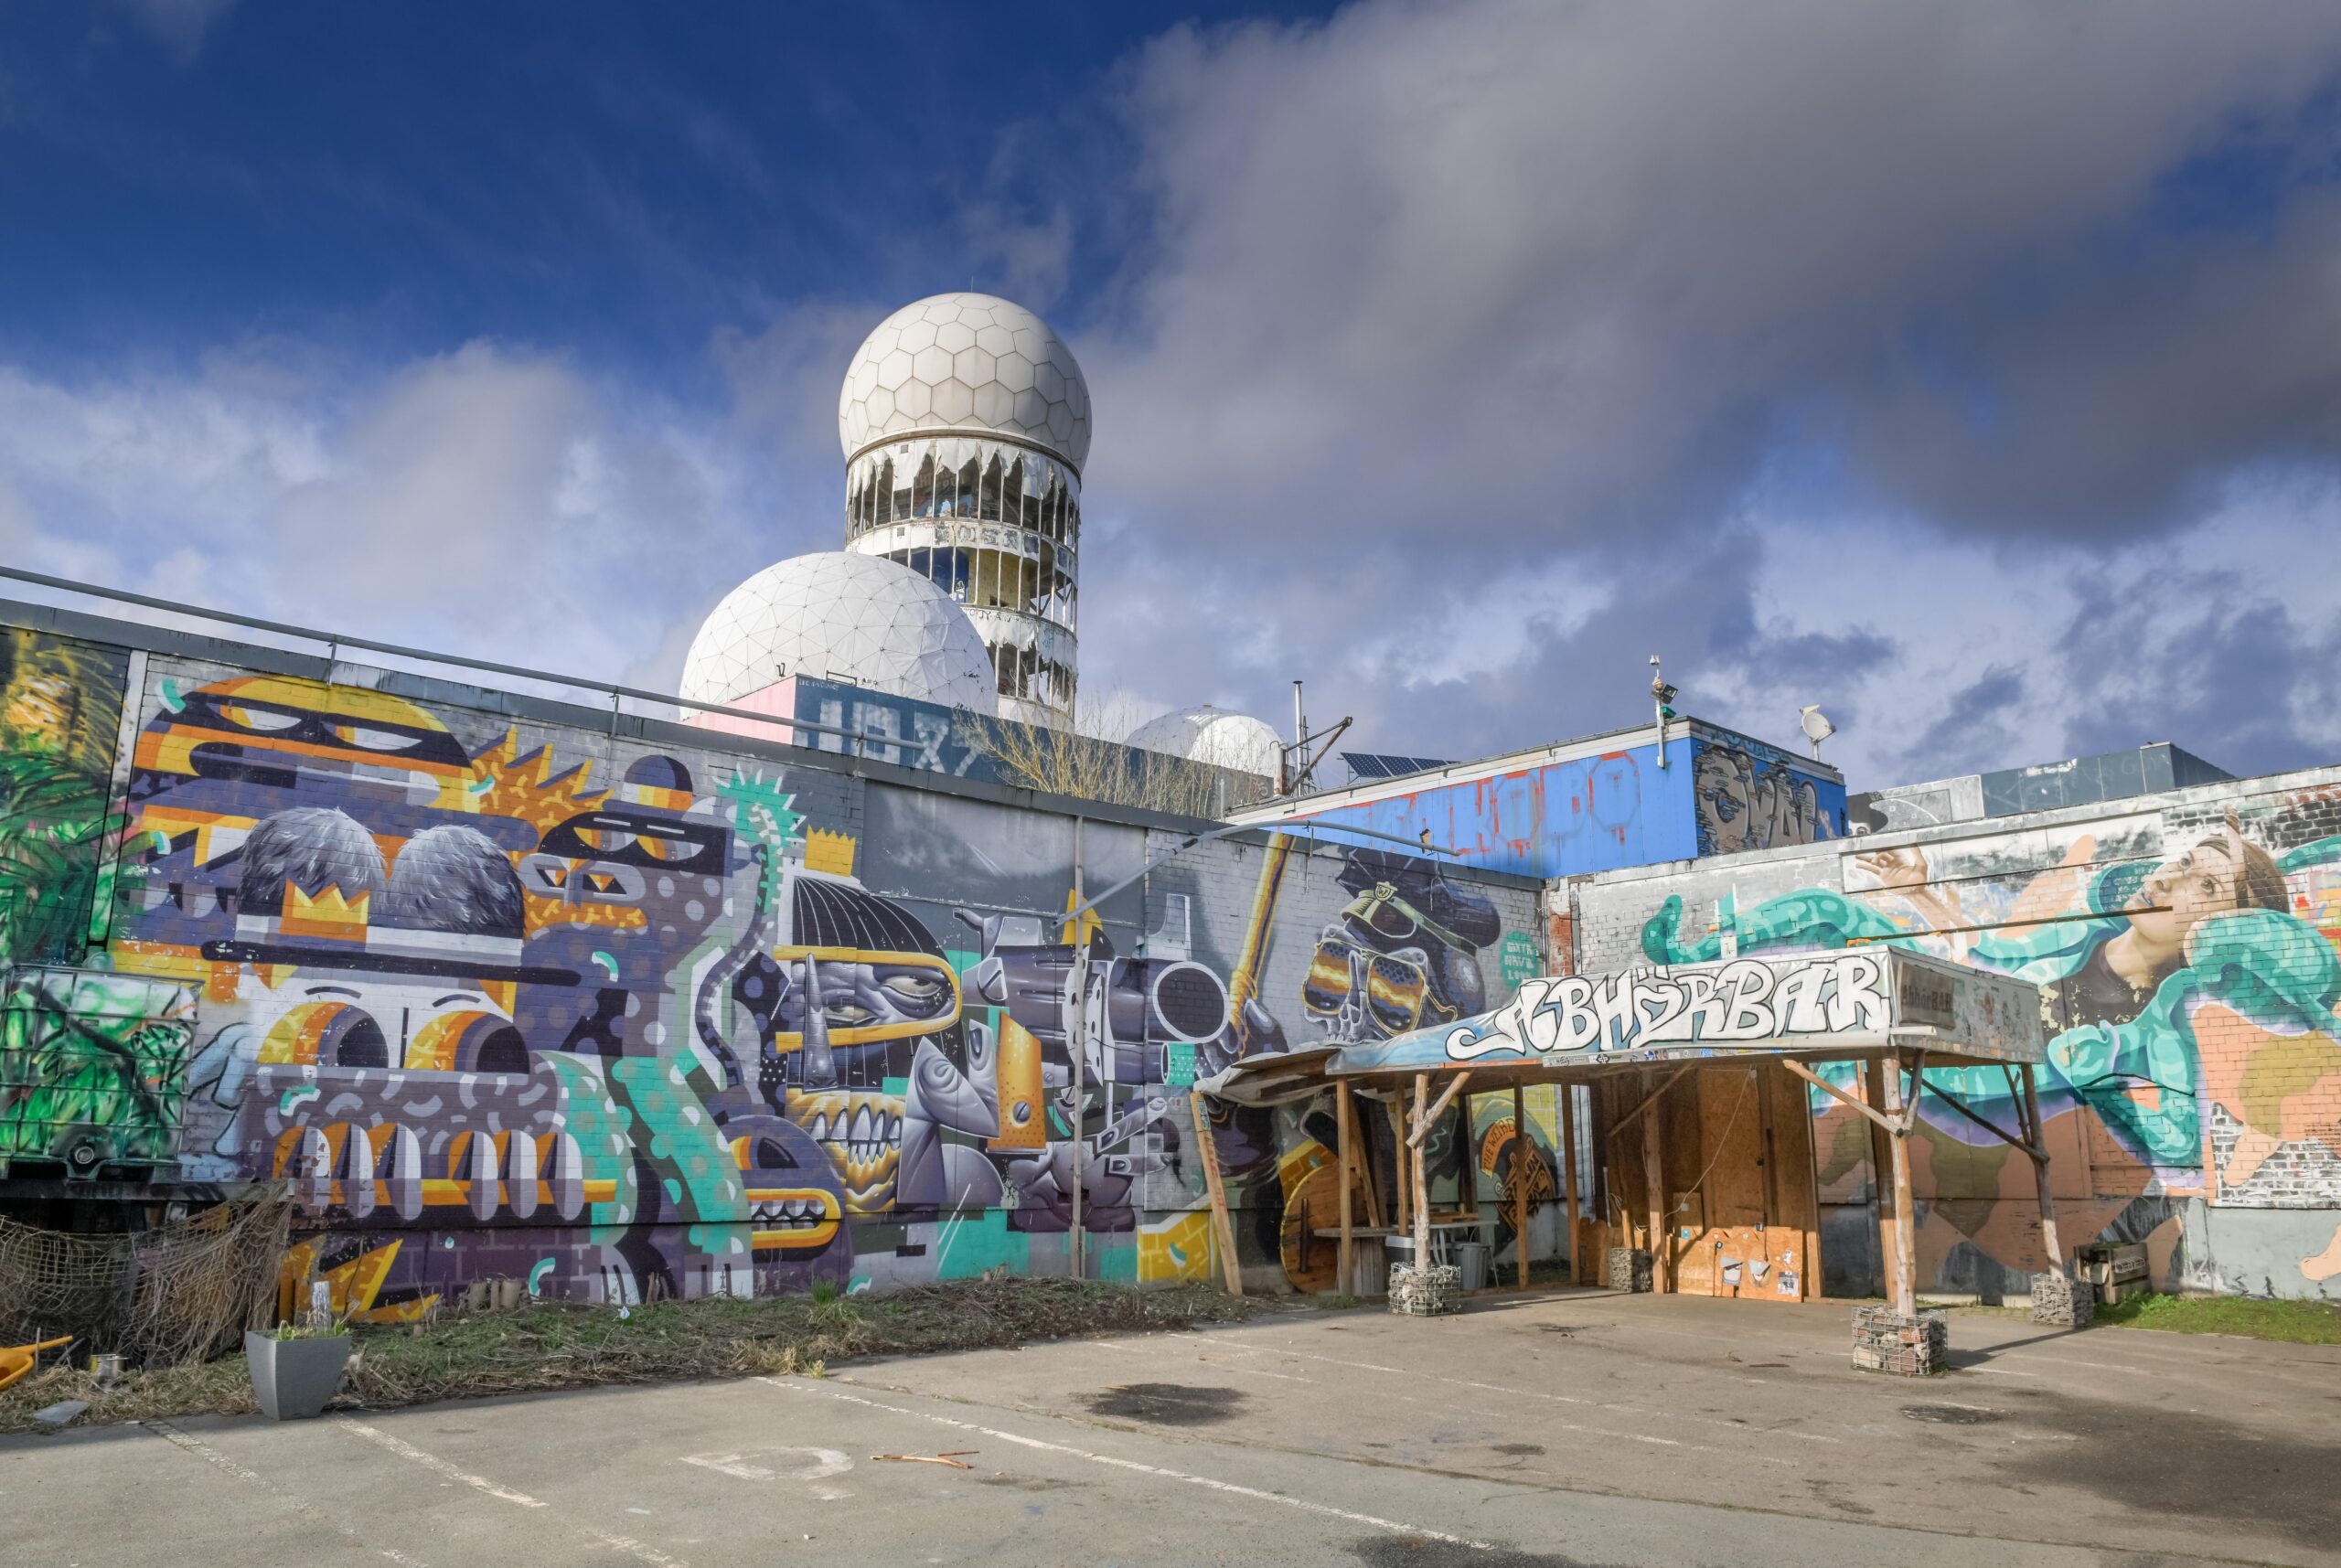 The listening station used by US and Brit spooks is now a canvas for graffiti artists